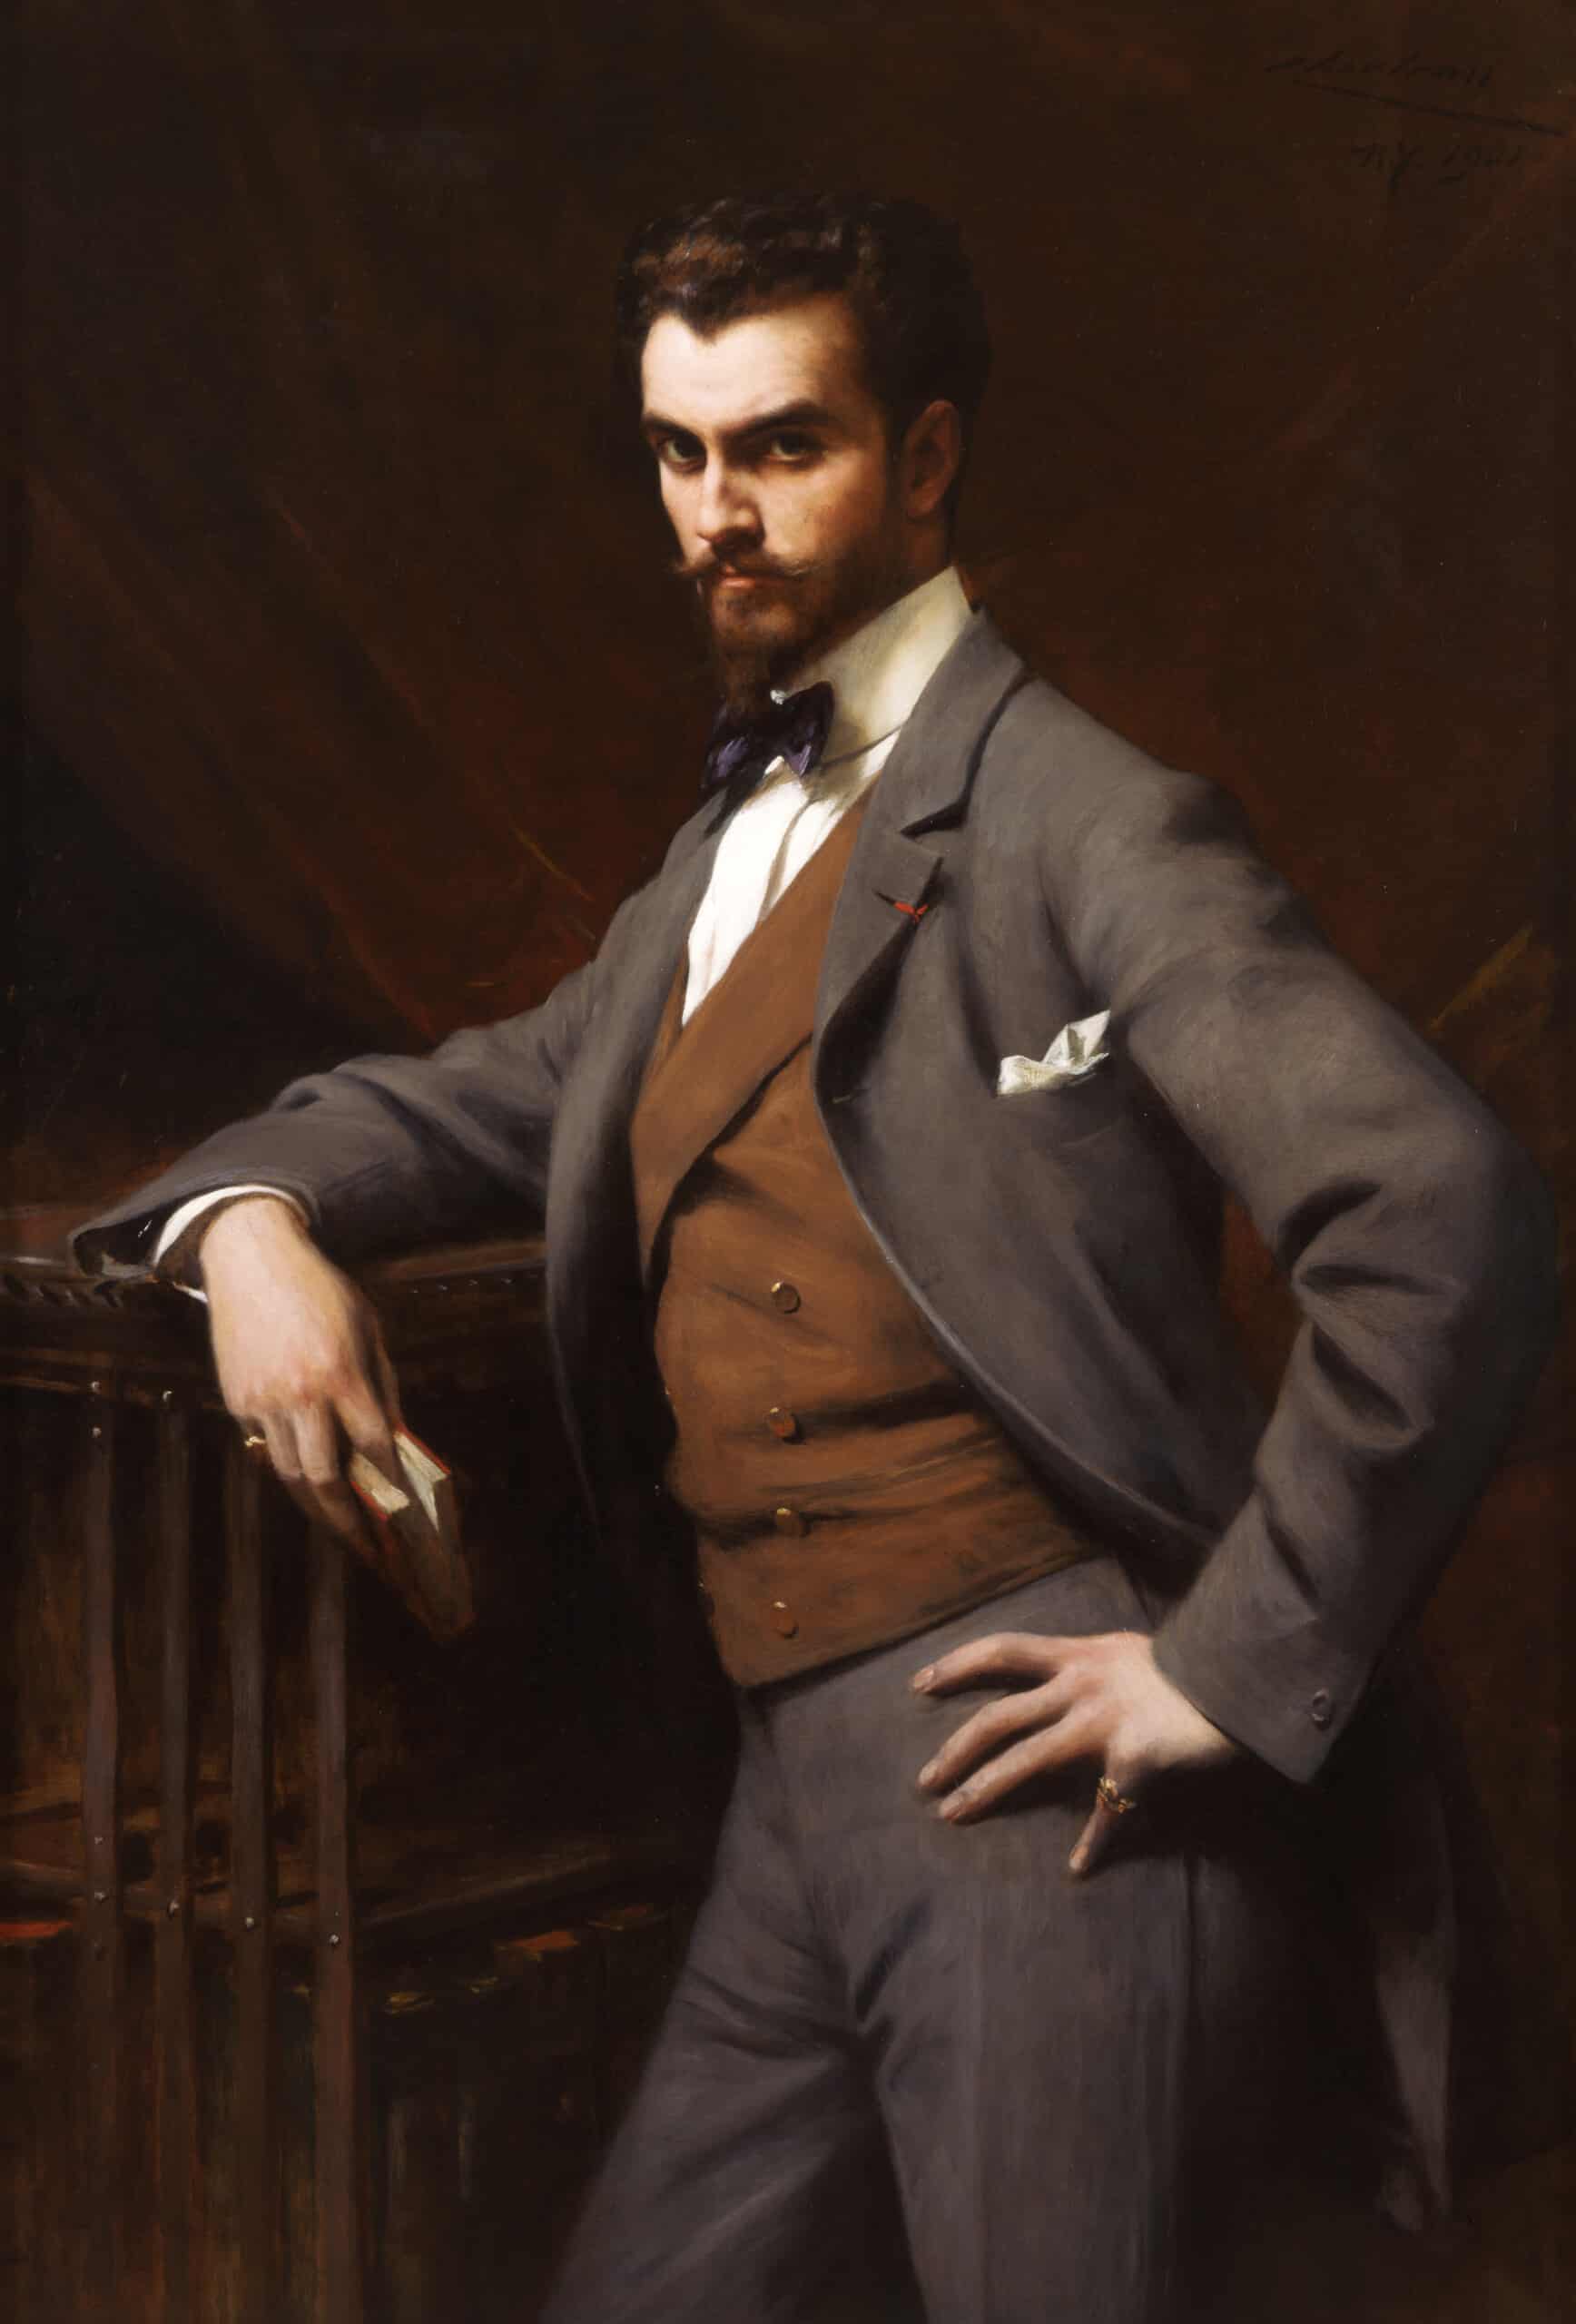 A young white man wears an expensive brown suit and pinky rings on both pinkies in this early 20th century painted portrait